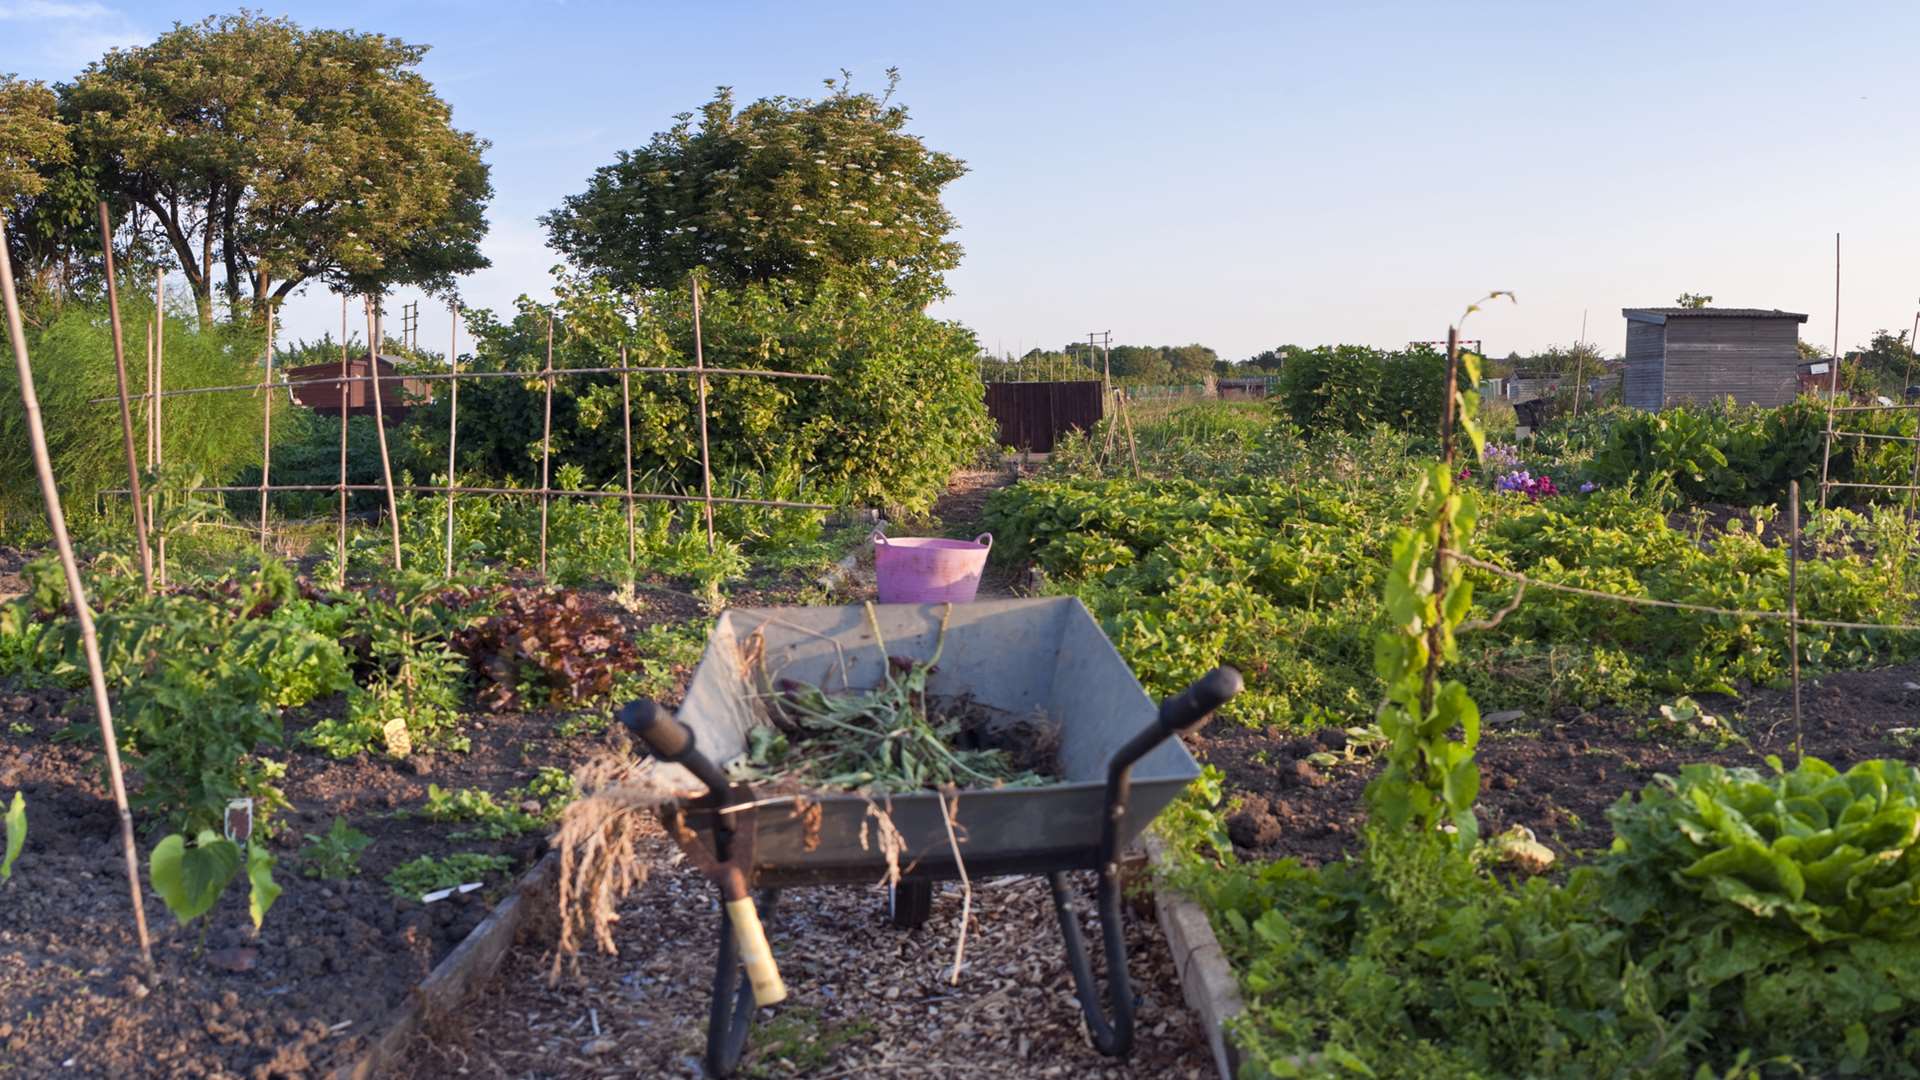 The price of an allotment will vary from borough to borough